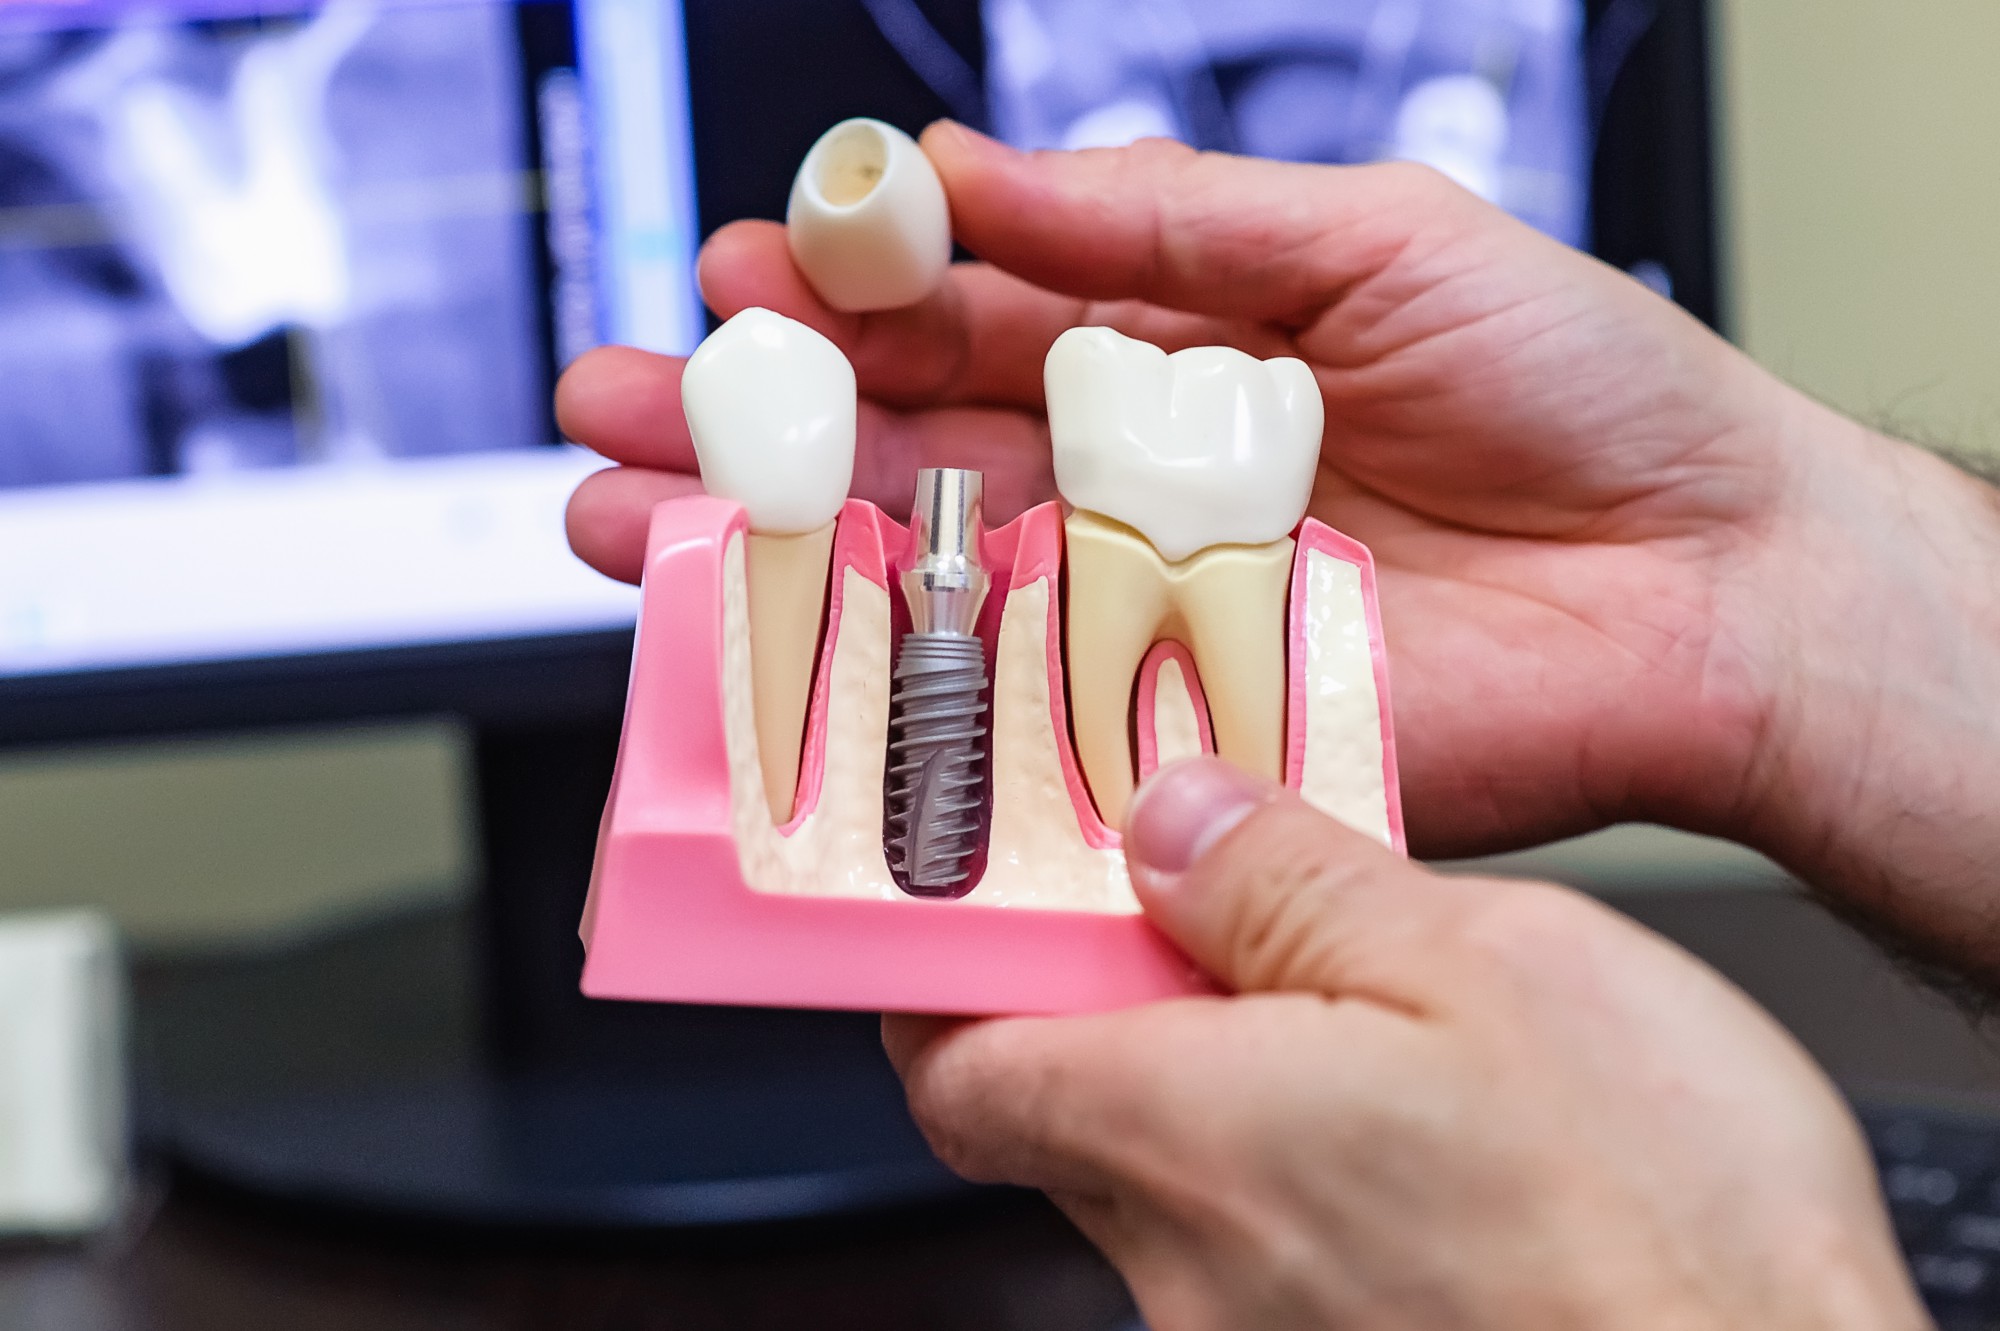 Dental Implant Market Global Research Report by Experts 2019 to 2024